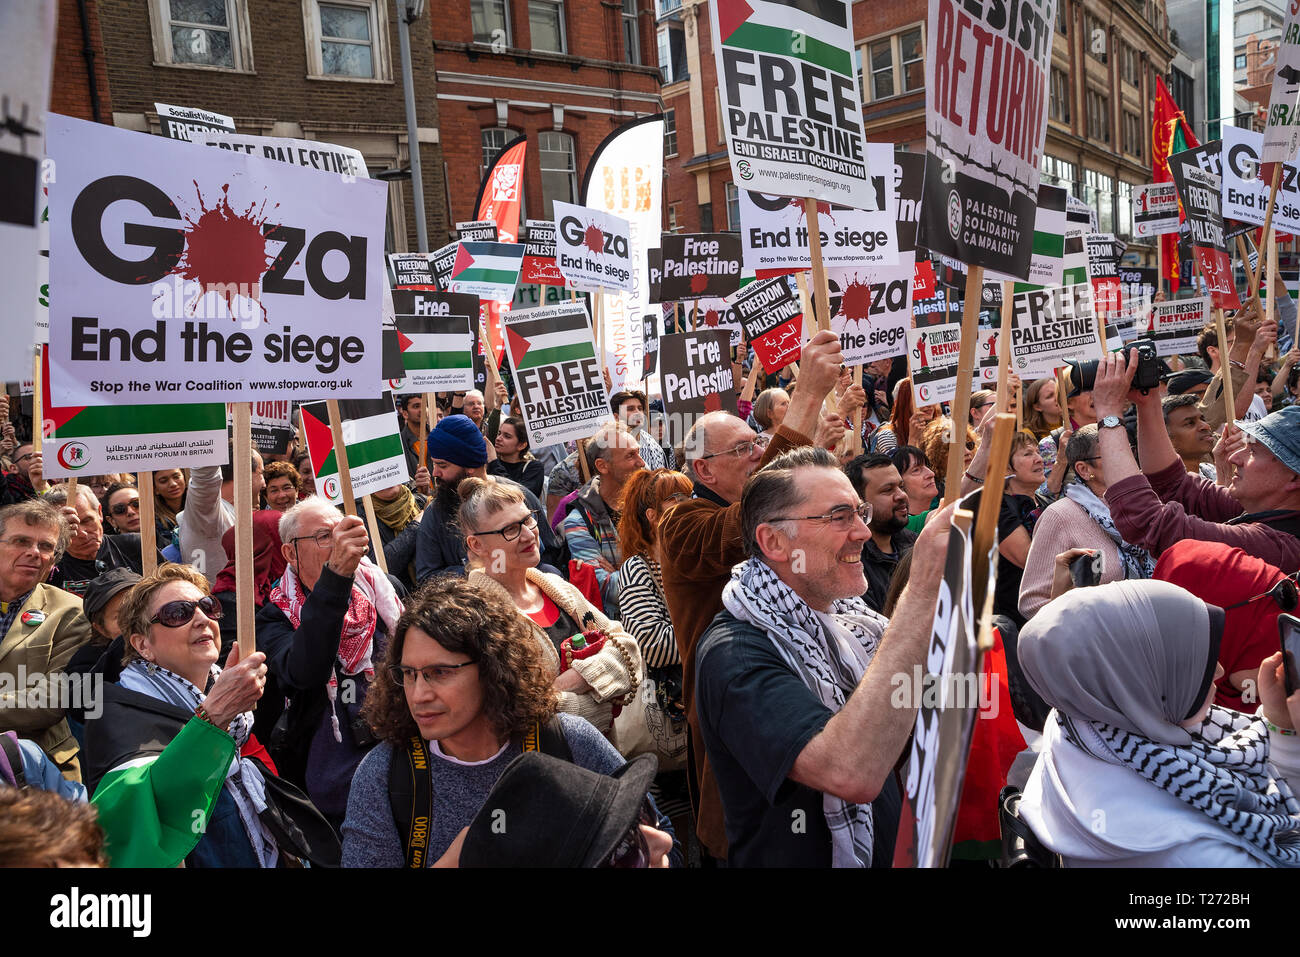 London, UK. 30th March 2019. Rally for Palestine, Exist, Resist and Return. Held outside the Israeli Embassy on Palestinian Land Day. Demanding freedom, justice and equality for the Palestinian people. March 30th also marks the the 1st anniversary of the start of the Great Return March. Organised by: Palestine Solidarity Campaign, Stop the War Coalition, Palestinian Forum in Britain, Friends of Al- Aqsa and Muslim Association of Britain. Credit: Stephen Bell/Alamy Live News. Stock Photo